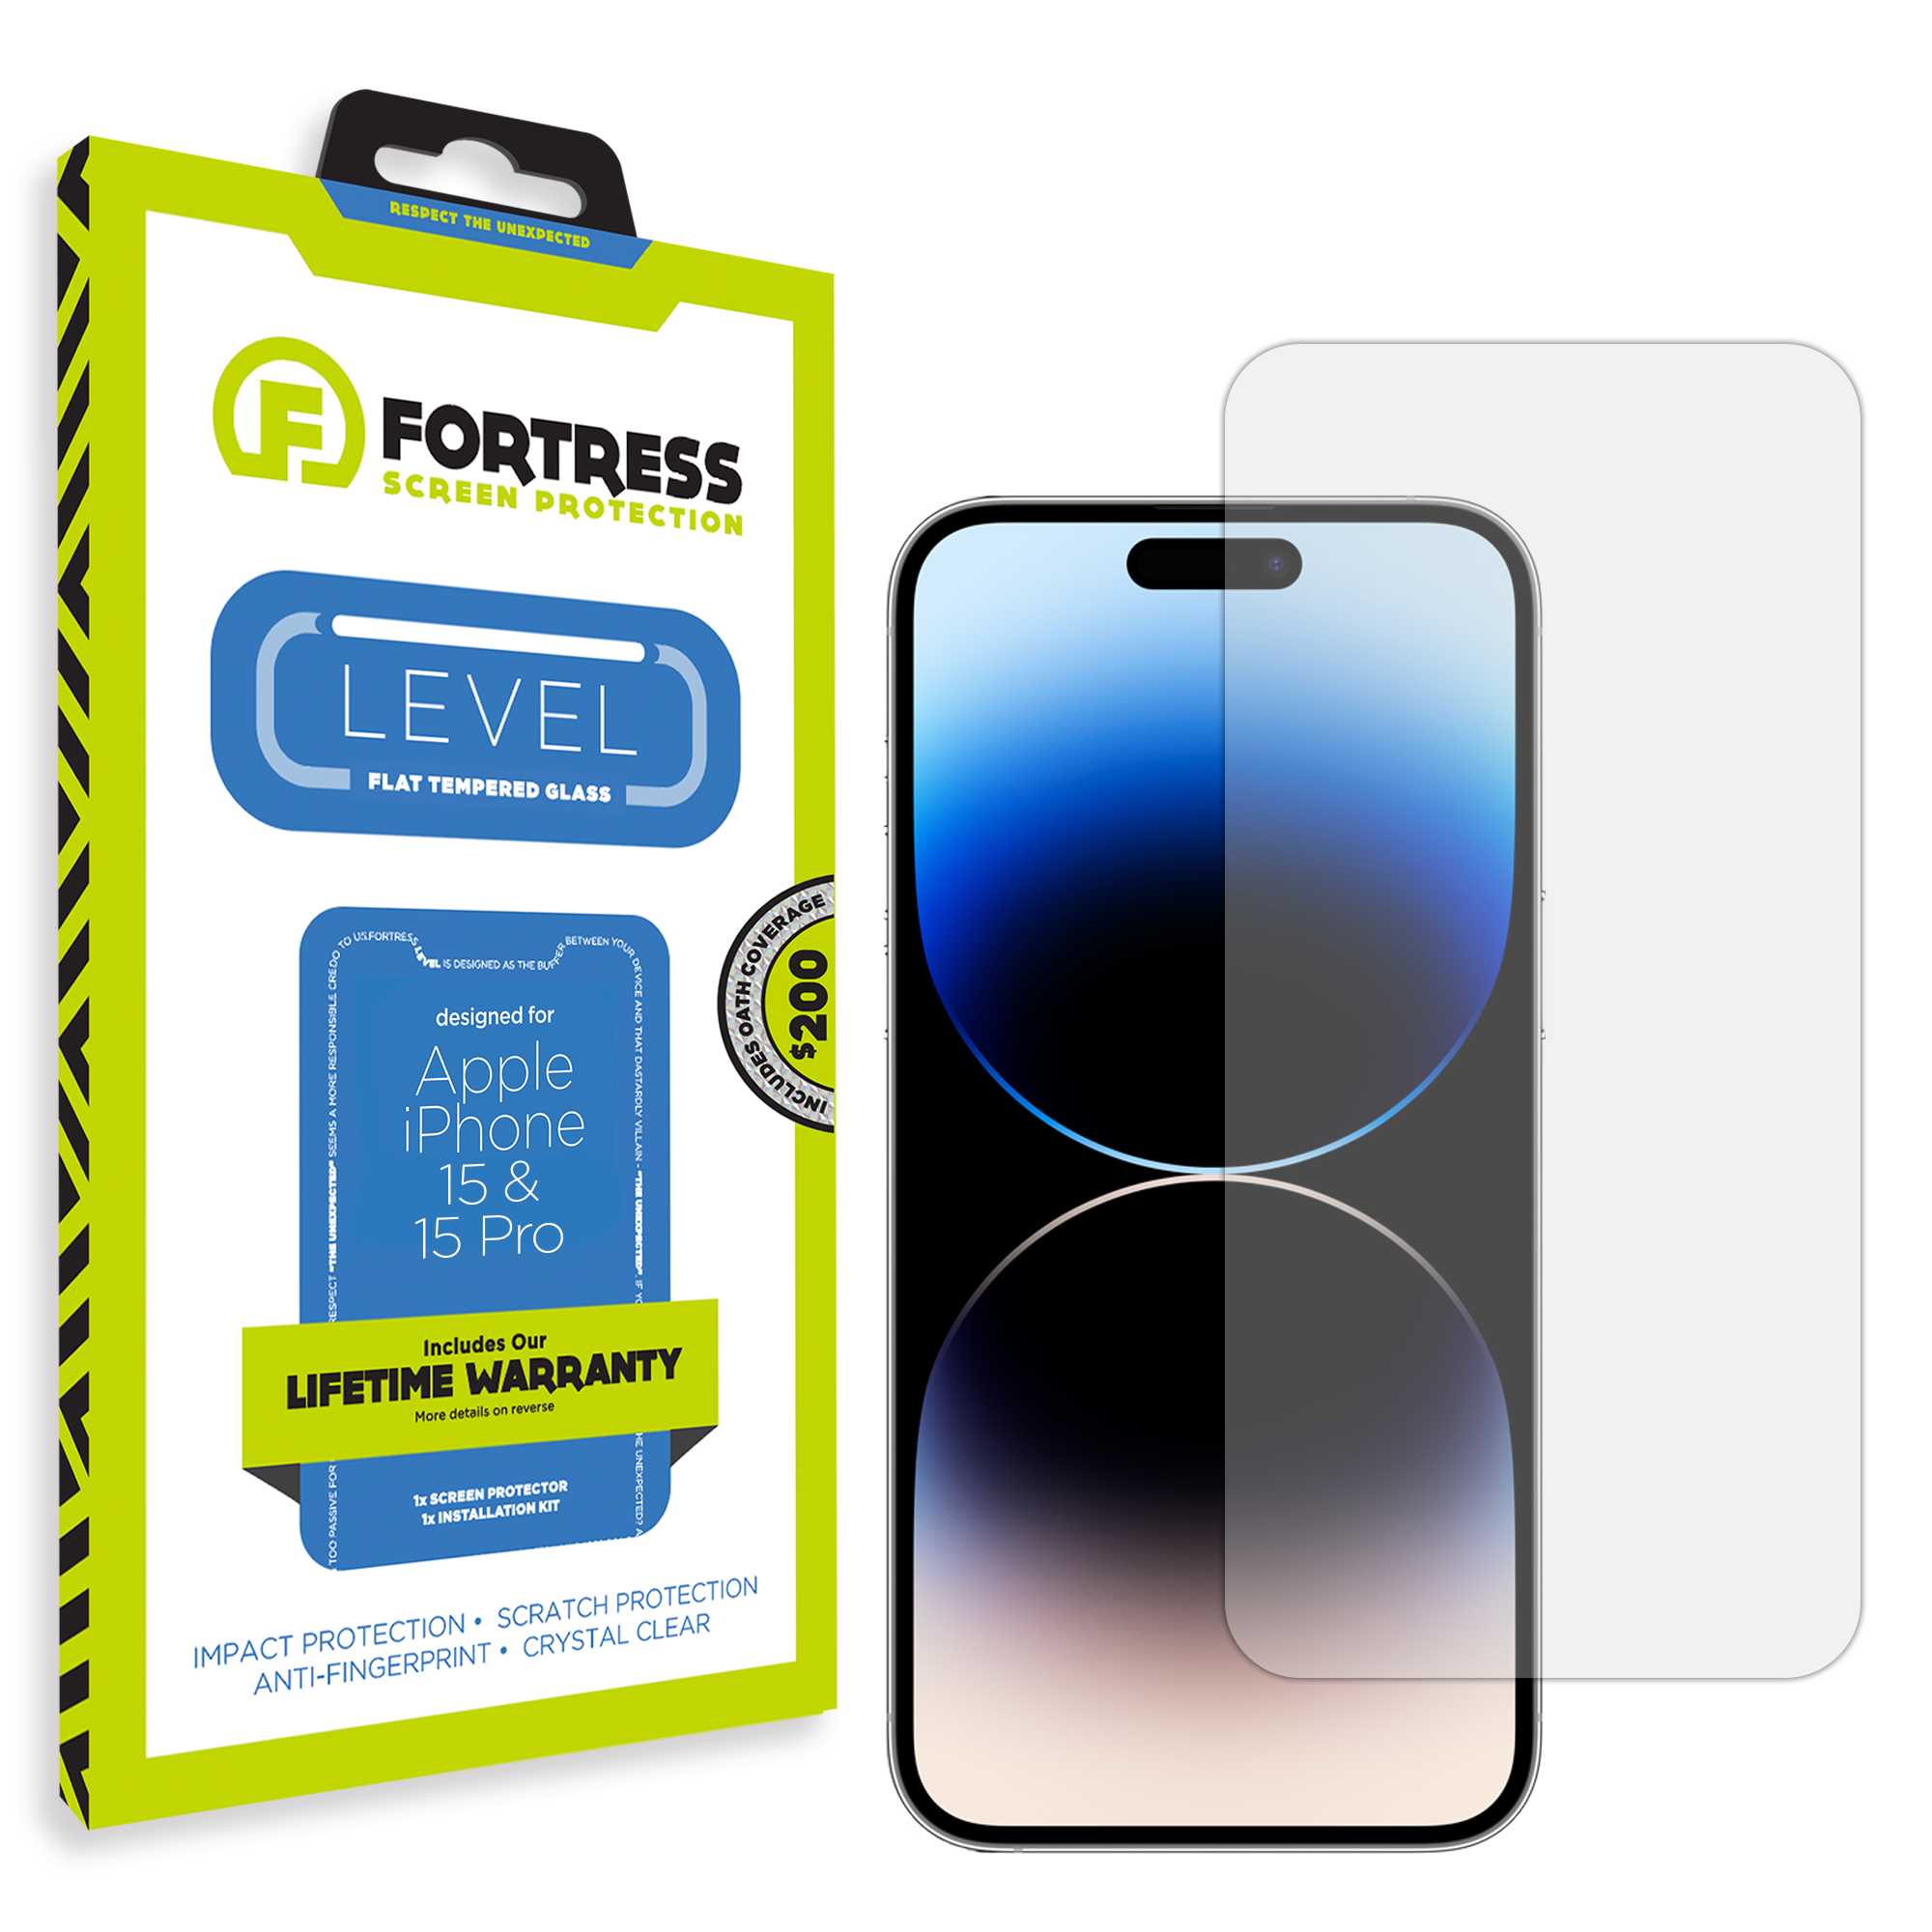 Fortress iPhone 15 Pro Screen Protector $200Coverage Scooch Screen Protector